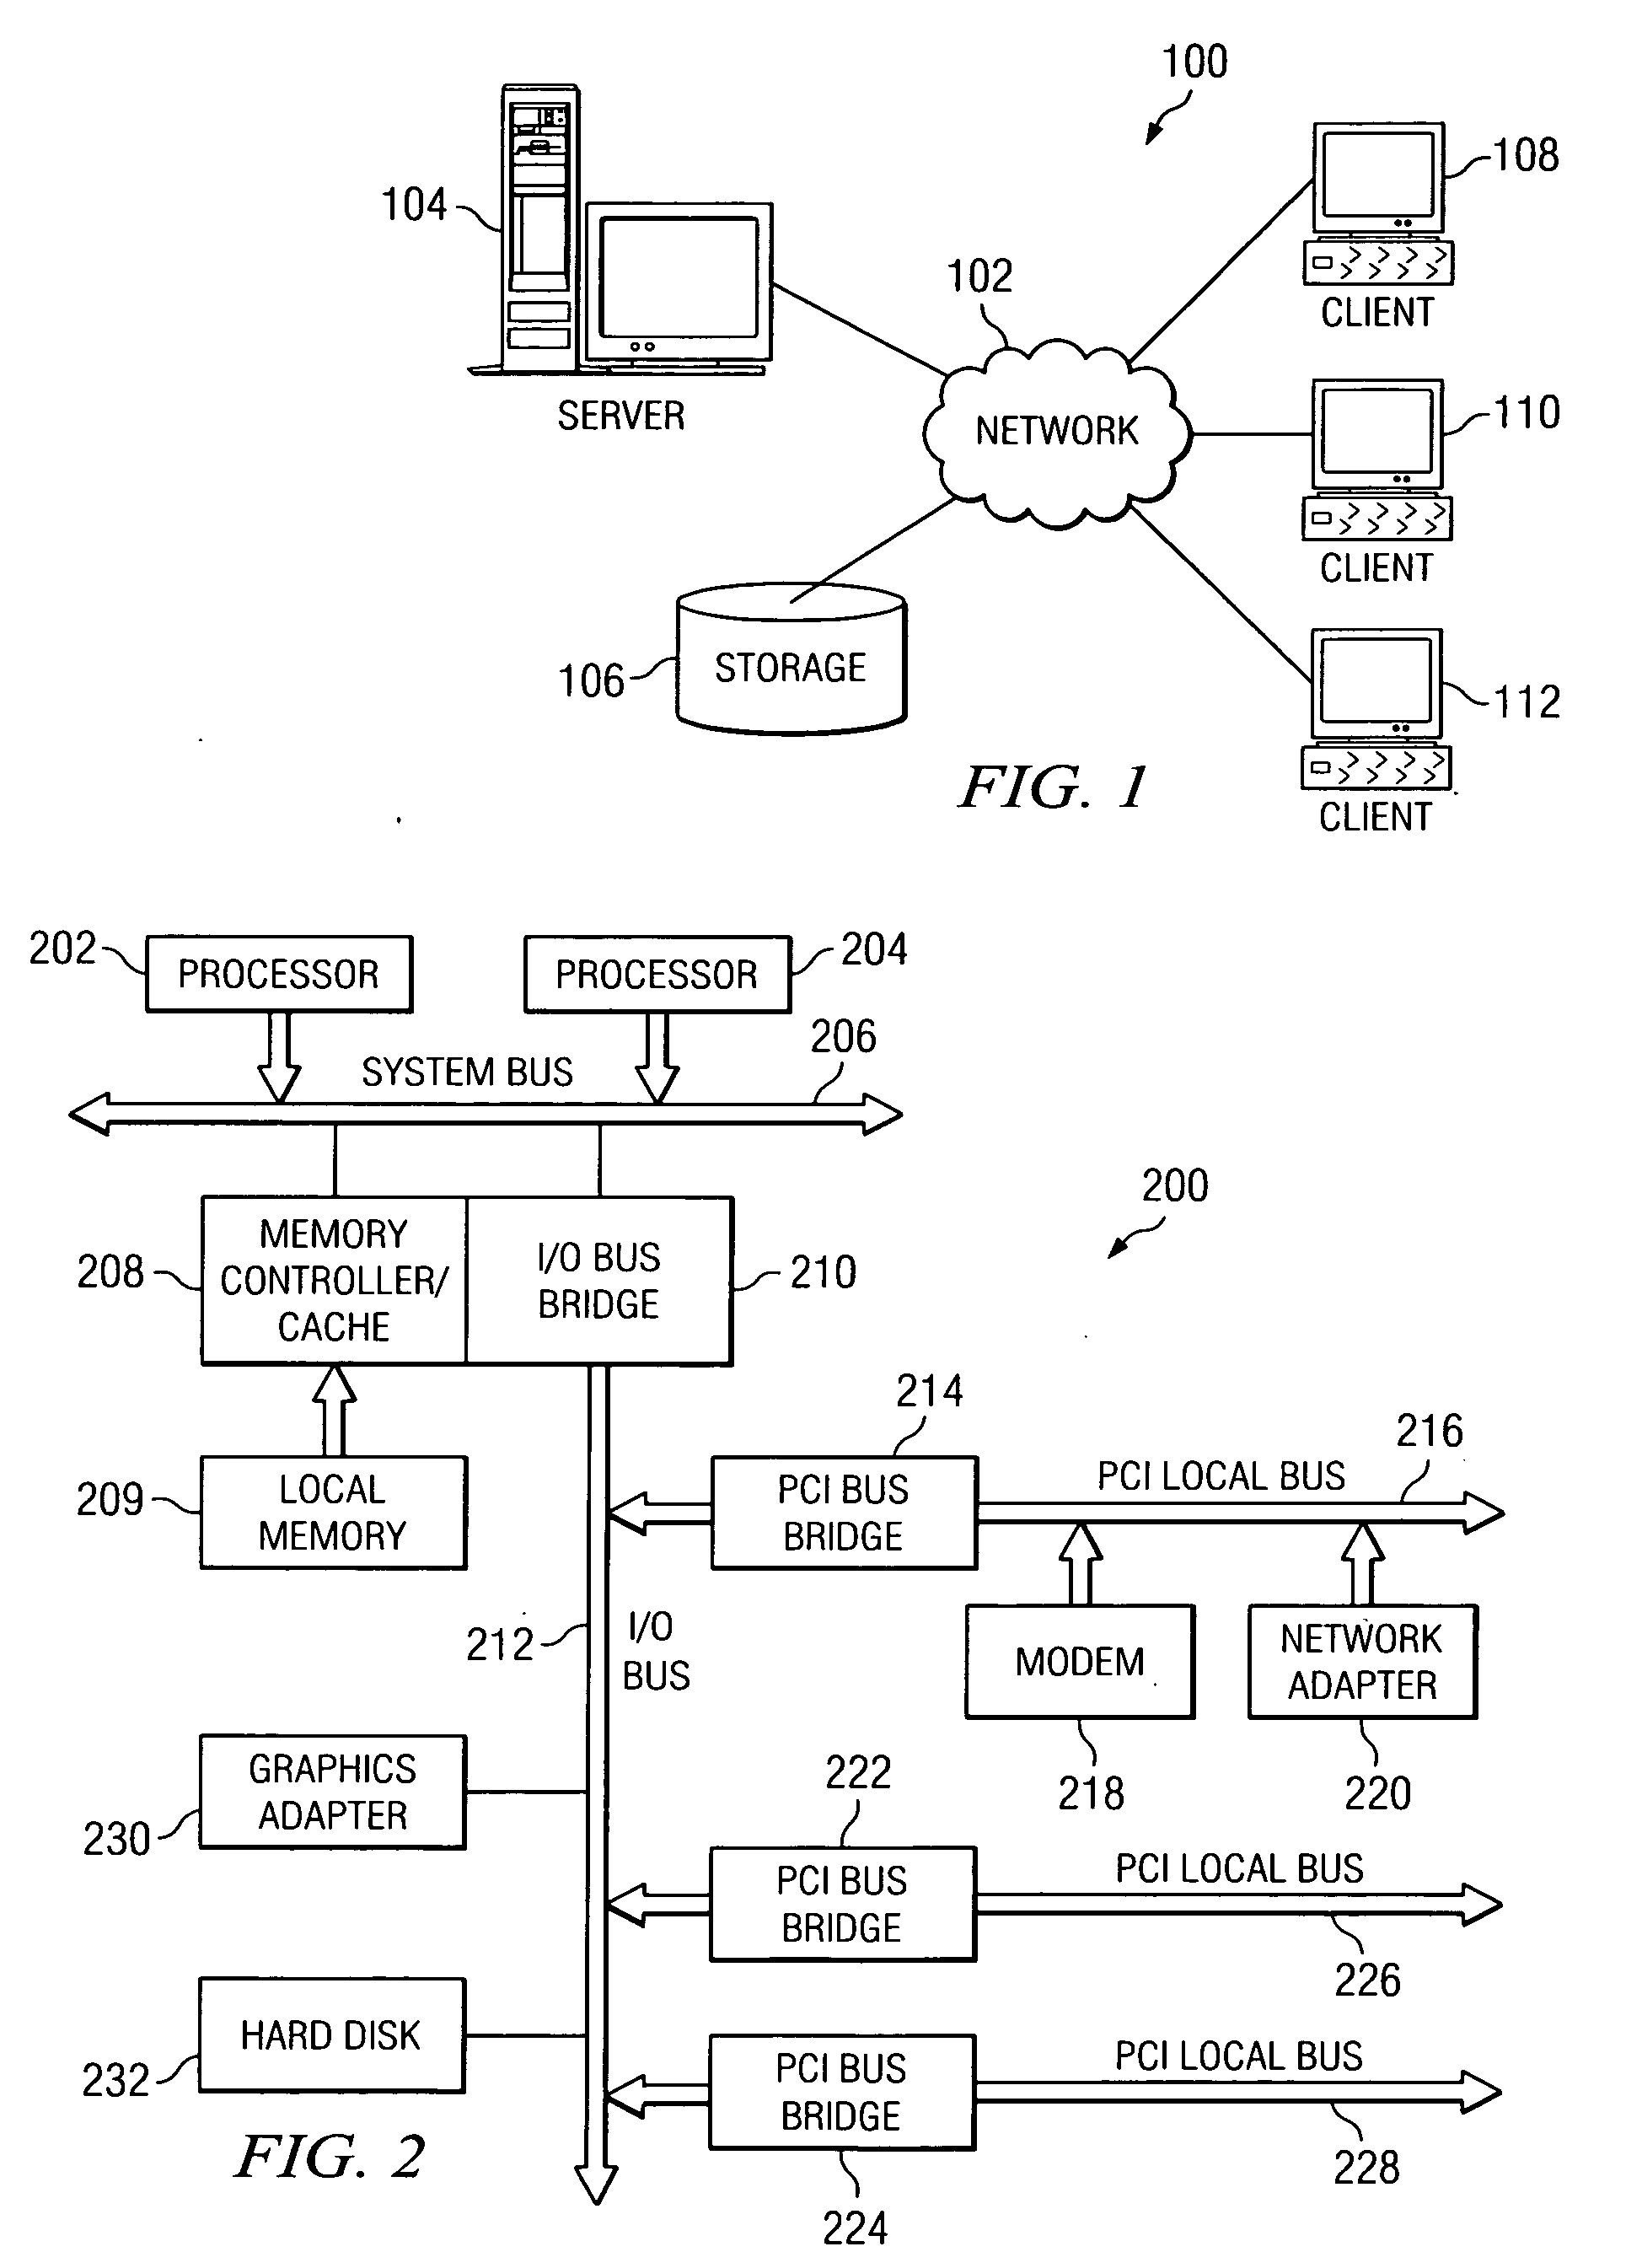 Method and process to automatically perform test builds or translated files for a software product